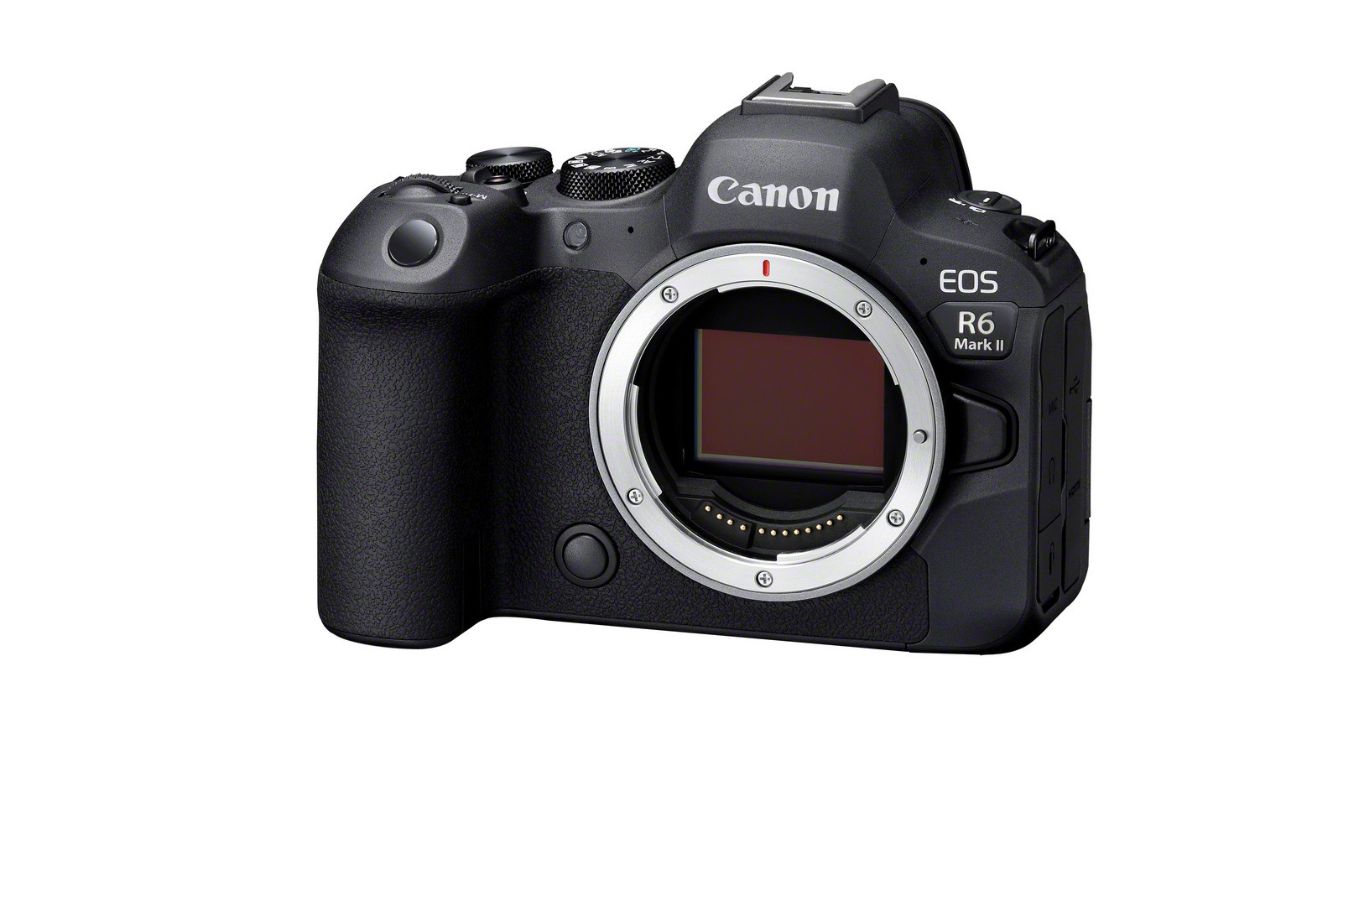 Canon EOS R6 Mark II & RF 24-105mm F4-7.1 IS STM Lens kit - Product Photo 7 - Front side view of the camera with the internal components visible